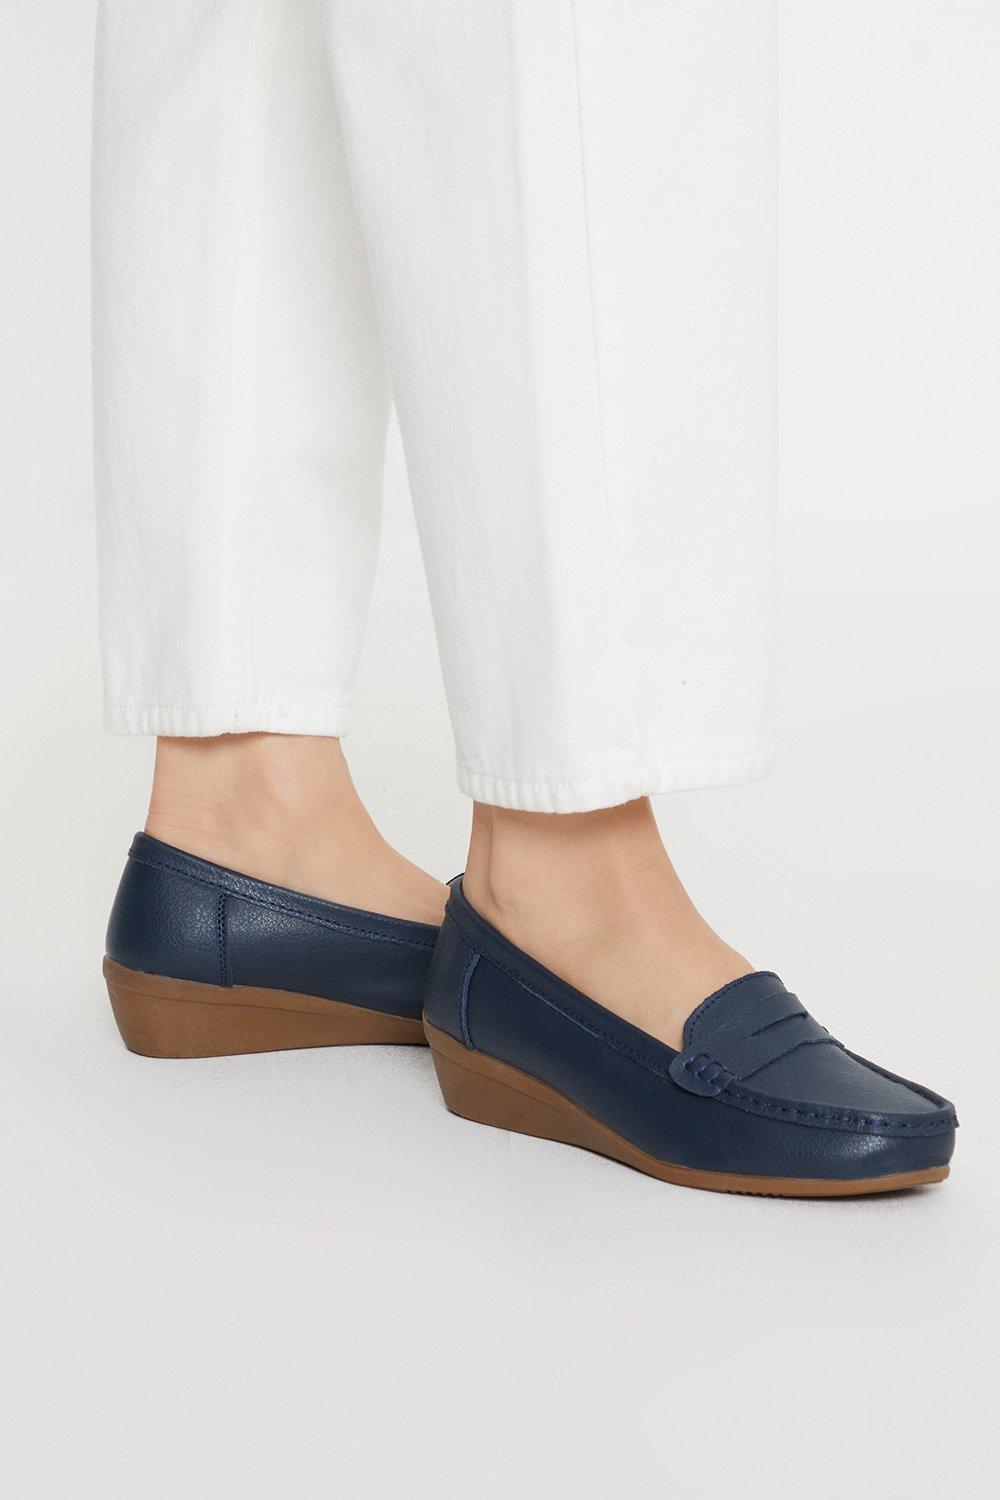 Women’s Good For The Sole: Niamh Wide Fit Leather Comfort Loafers - navy - 3